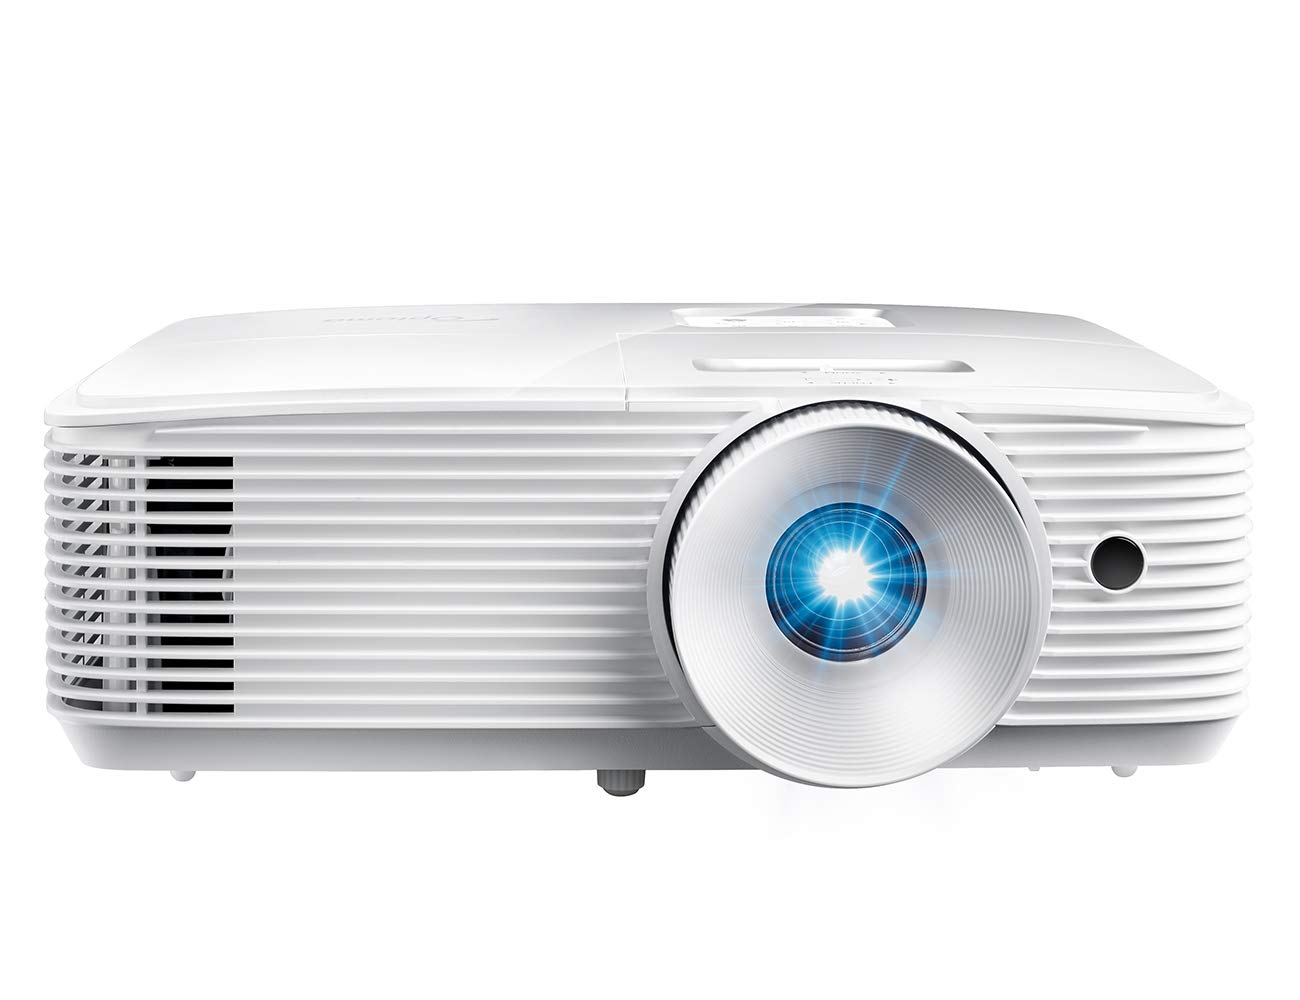 Optoma HD28HDR 1080p Home Theater Projector for Gaming and Movies - $499.00 + F/S - Amazon